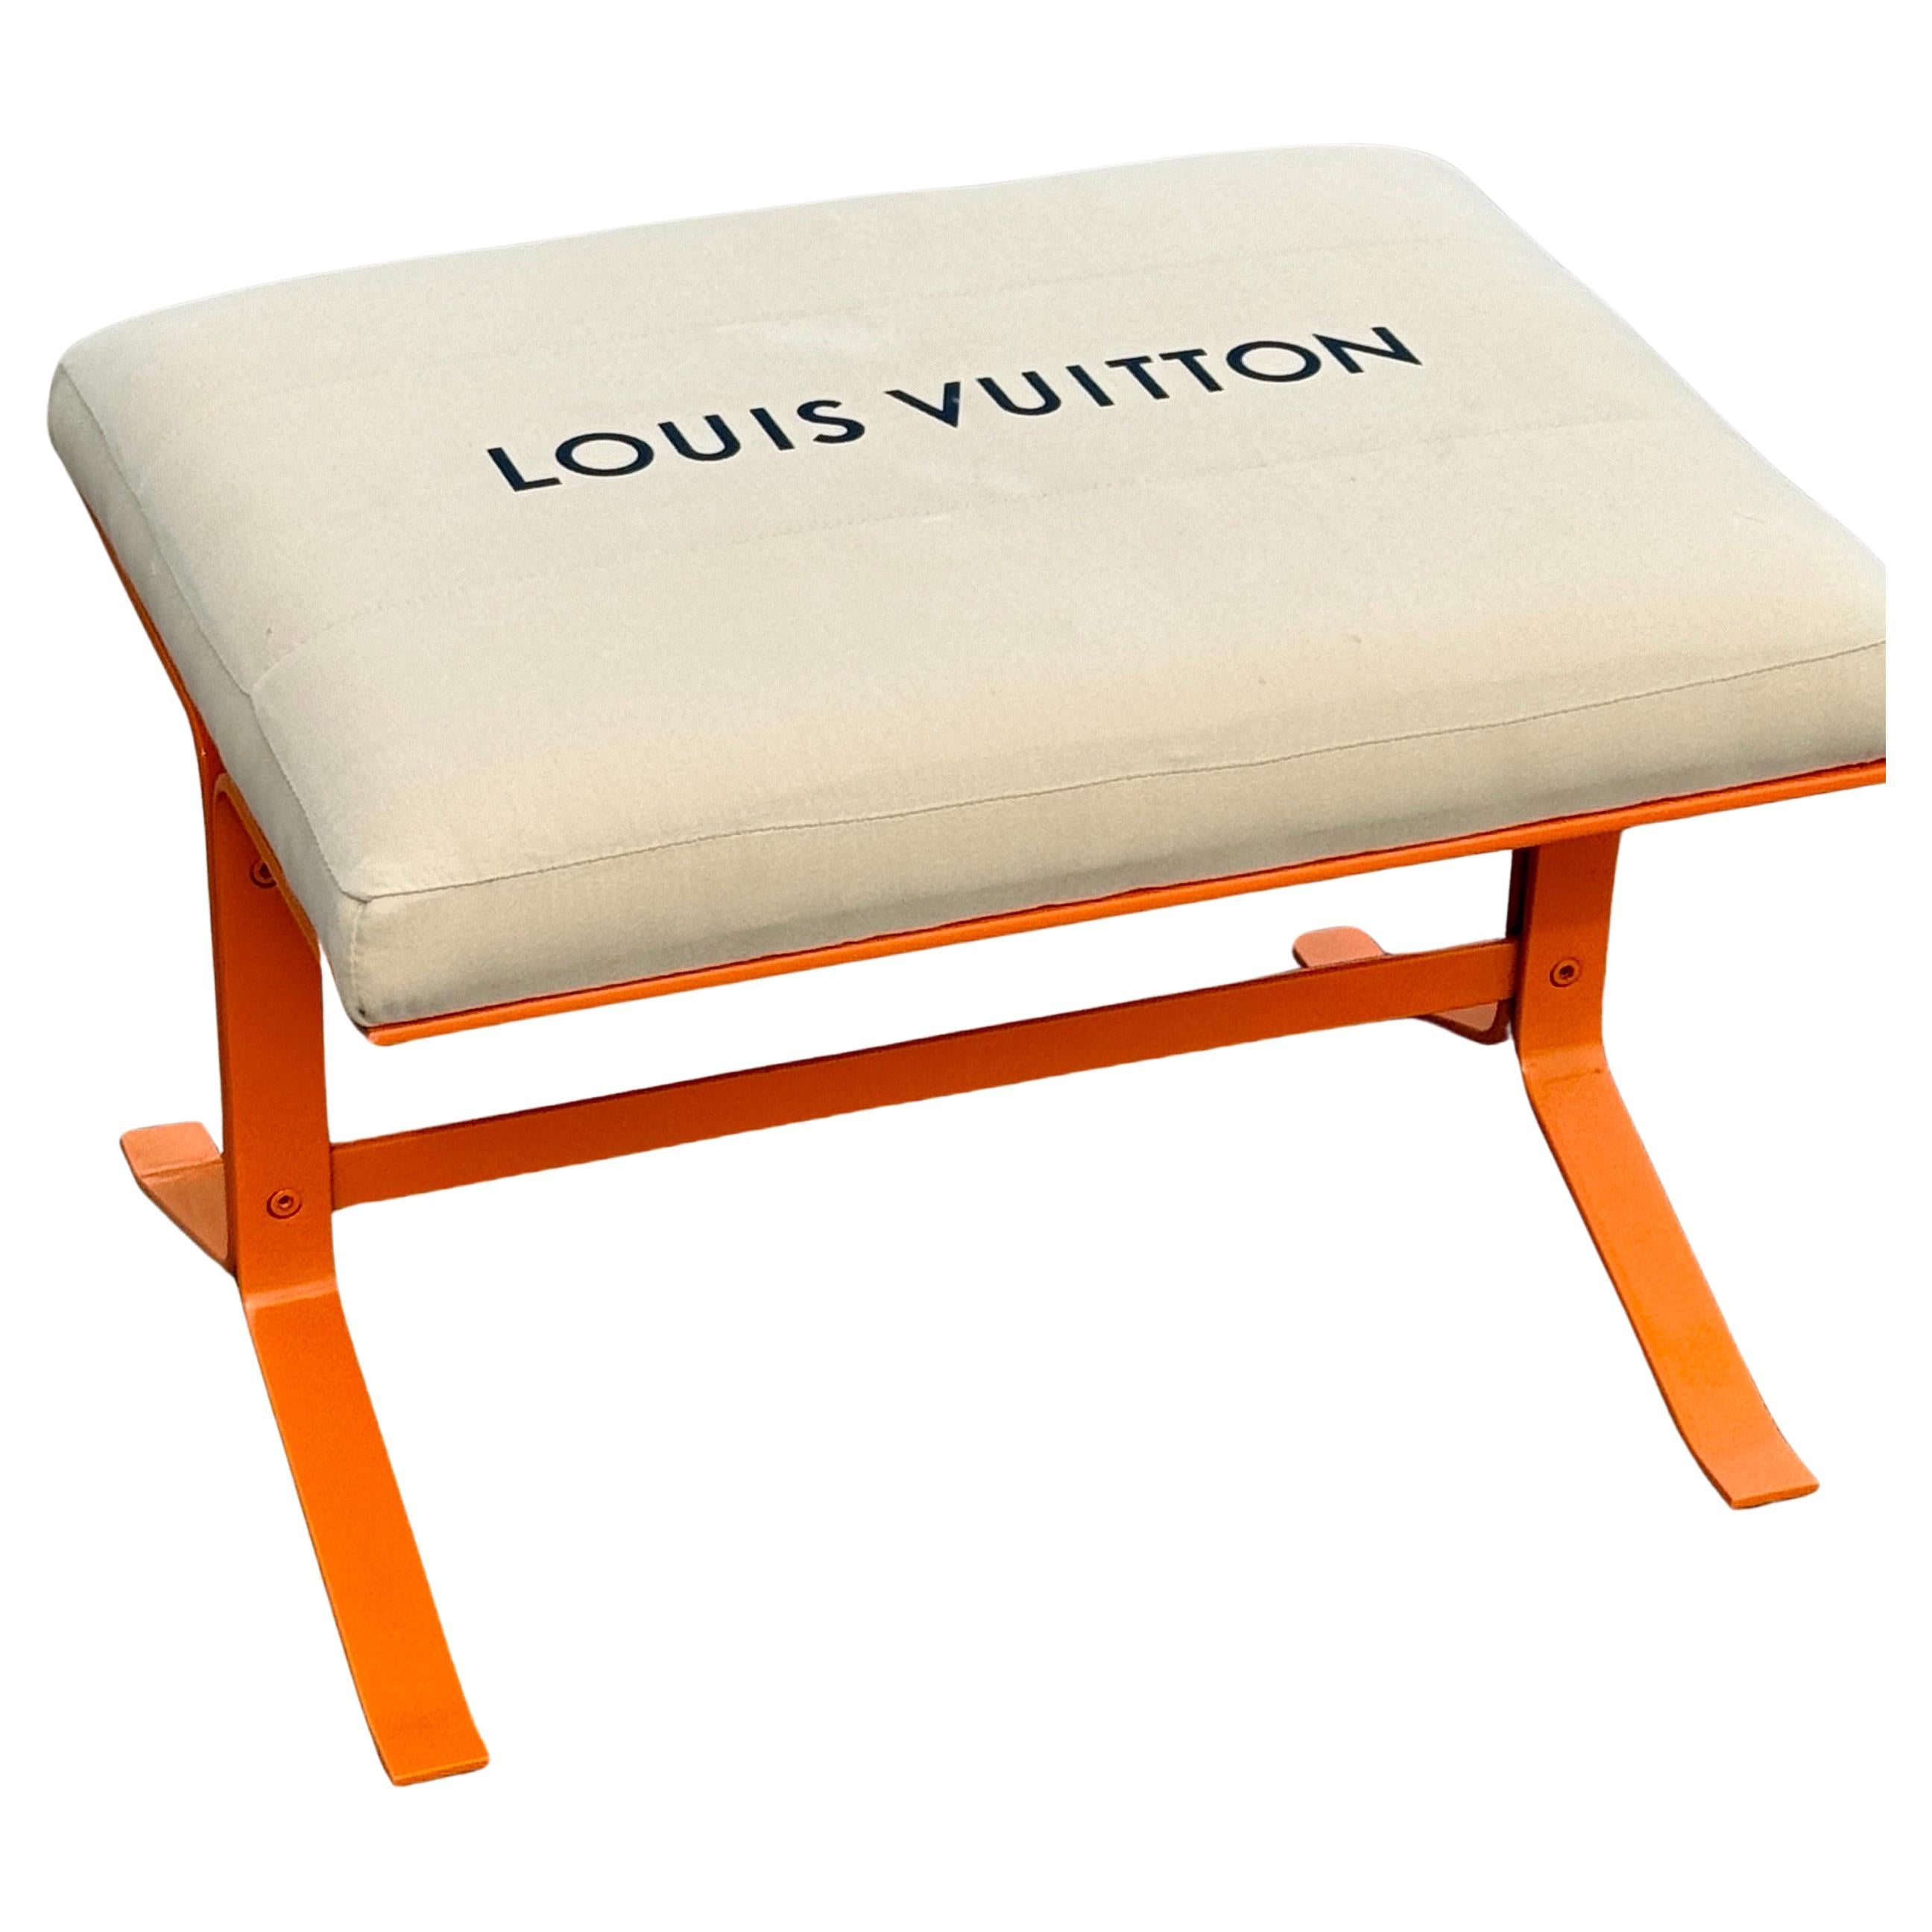 Mid-Century Modern Orange Upholstered Bench With Louis Vuitton Bag Fabric For Sale